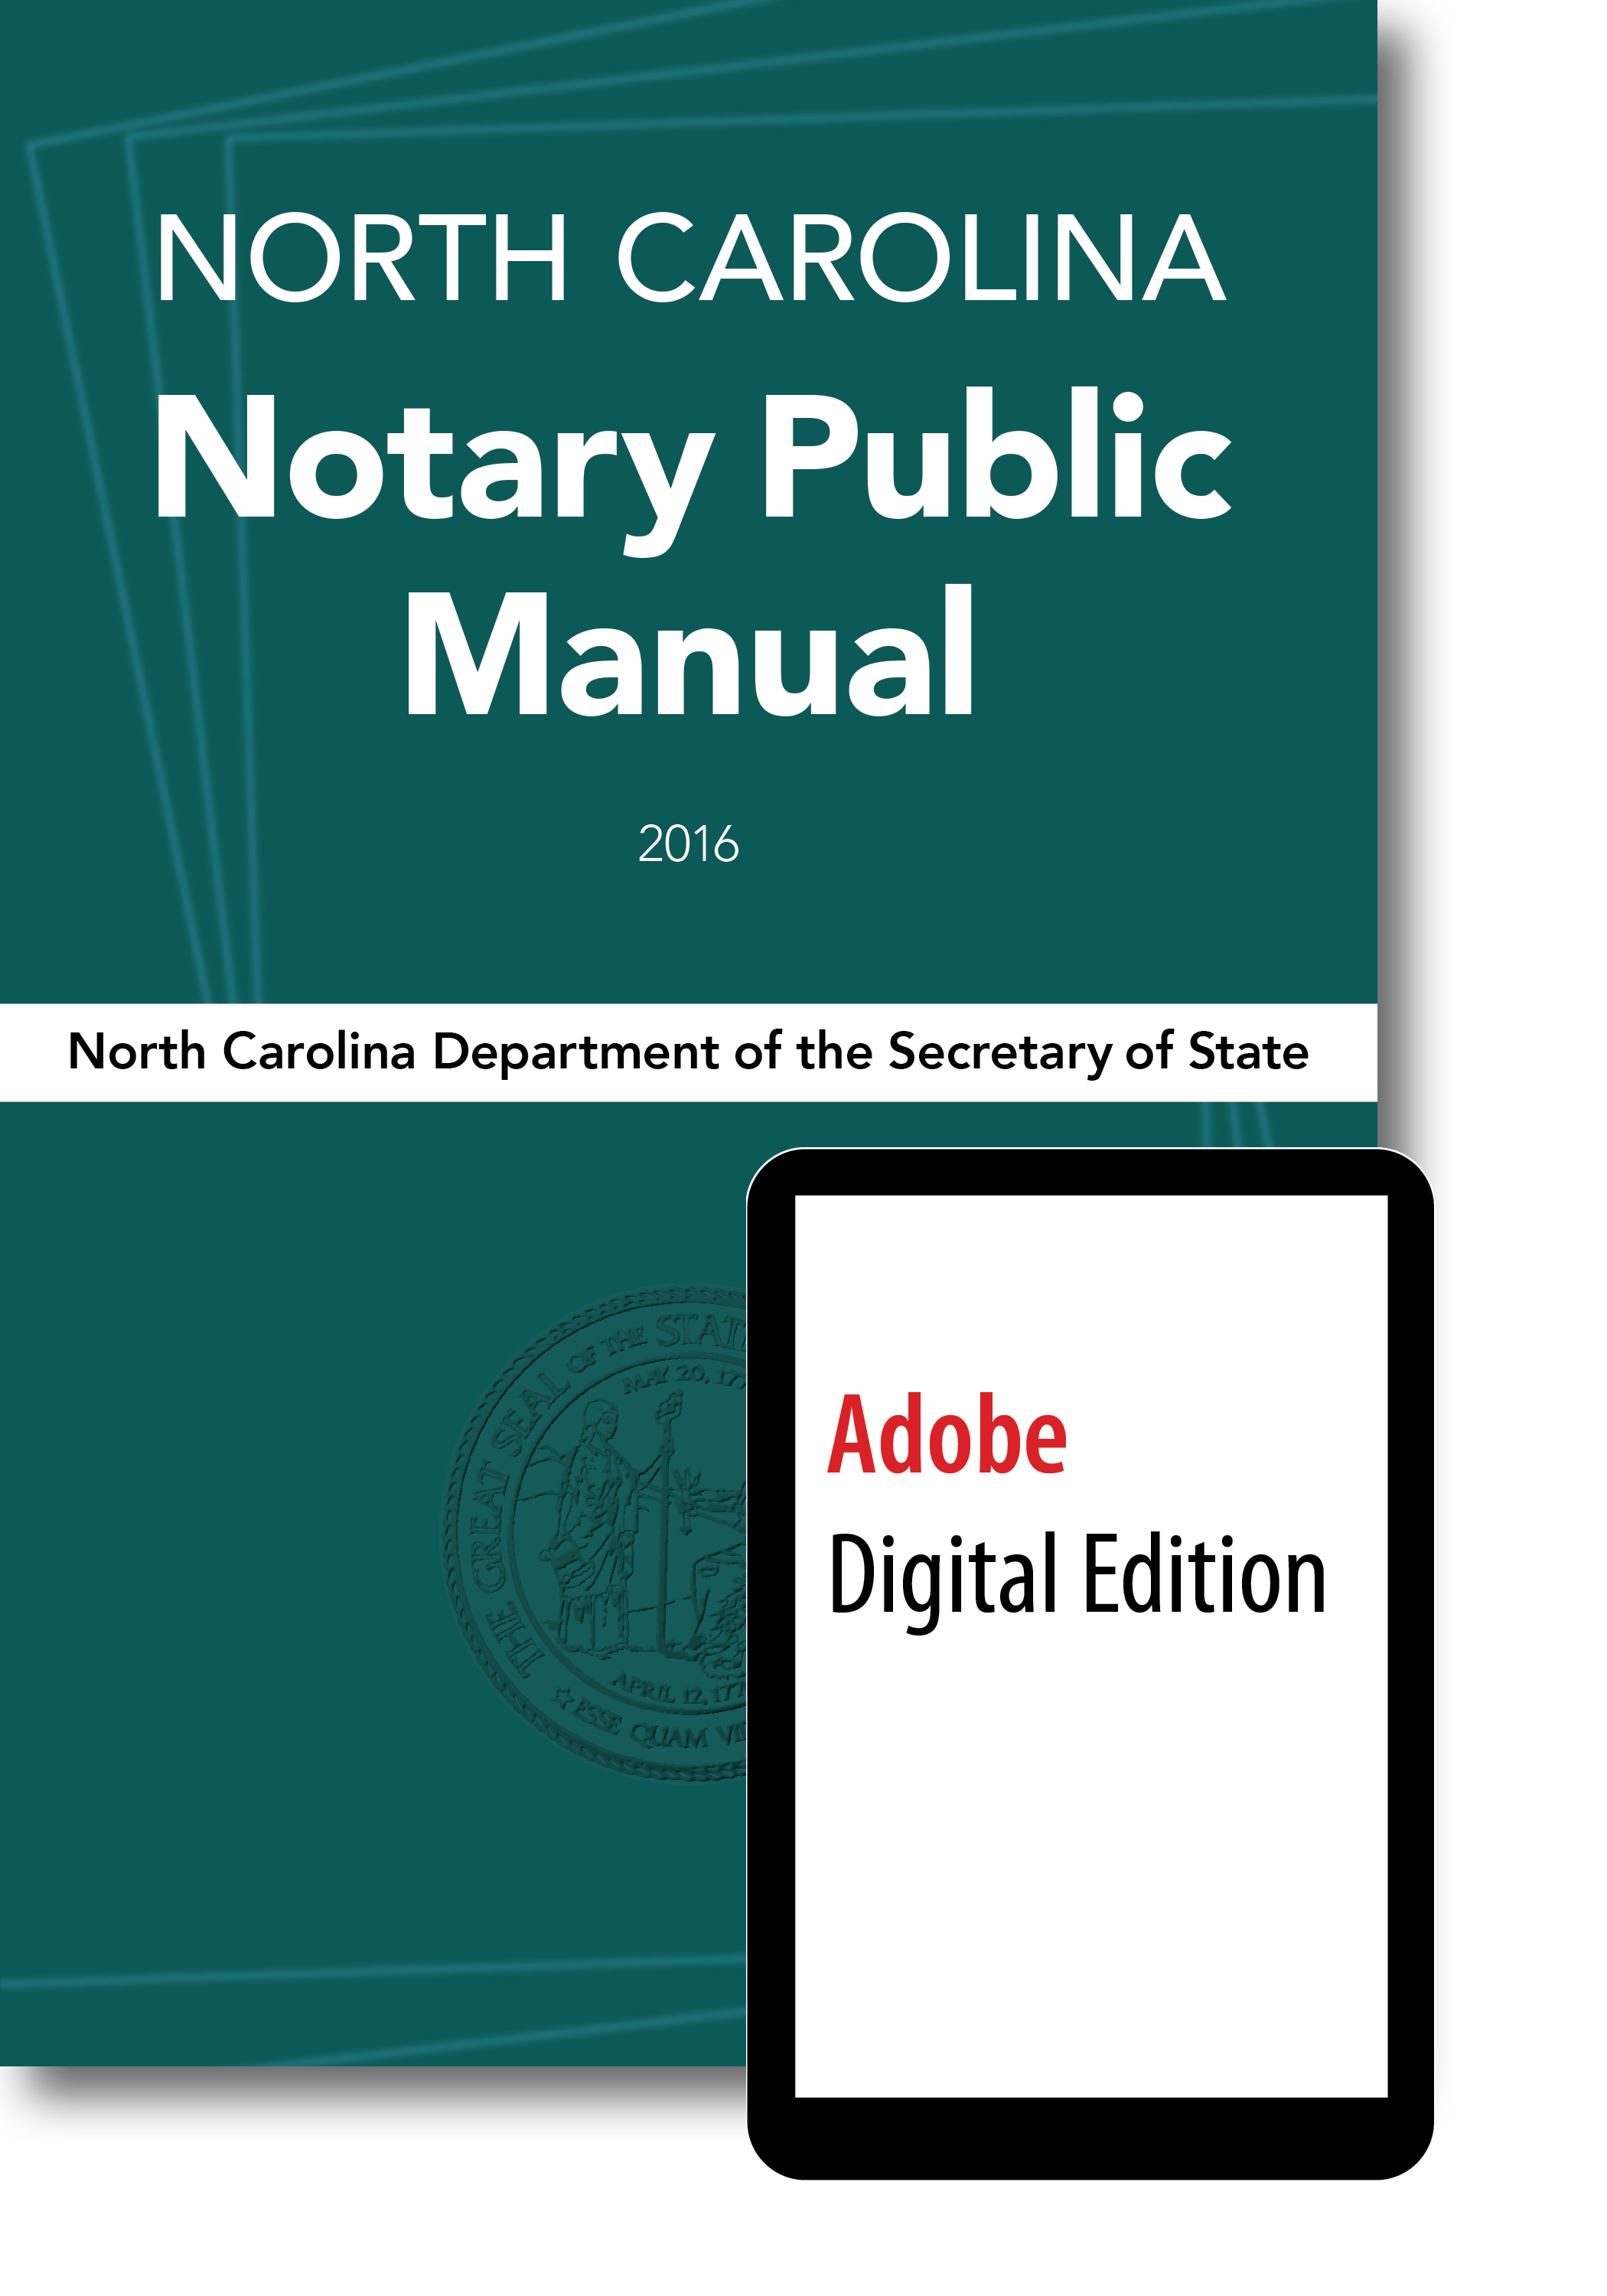 Cover image for EPUB Download Item: North Carolina Notary Public Manual, 2016